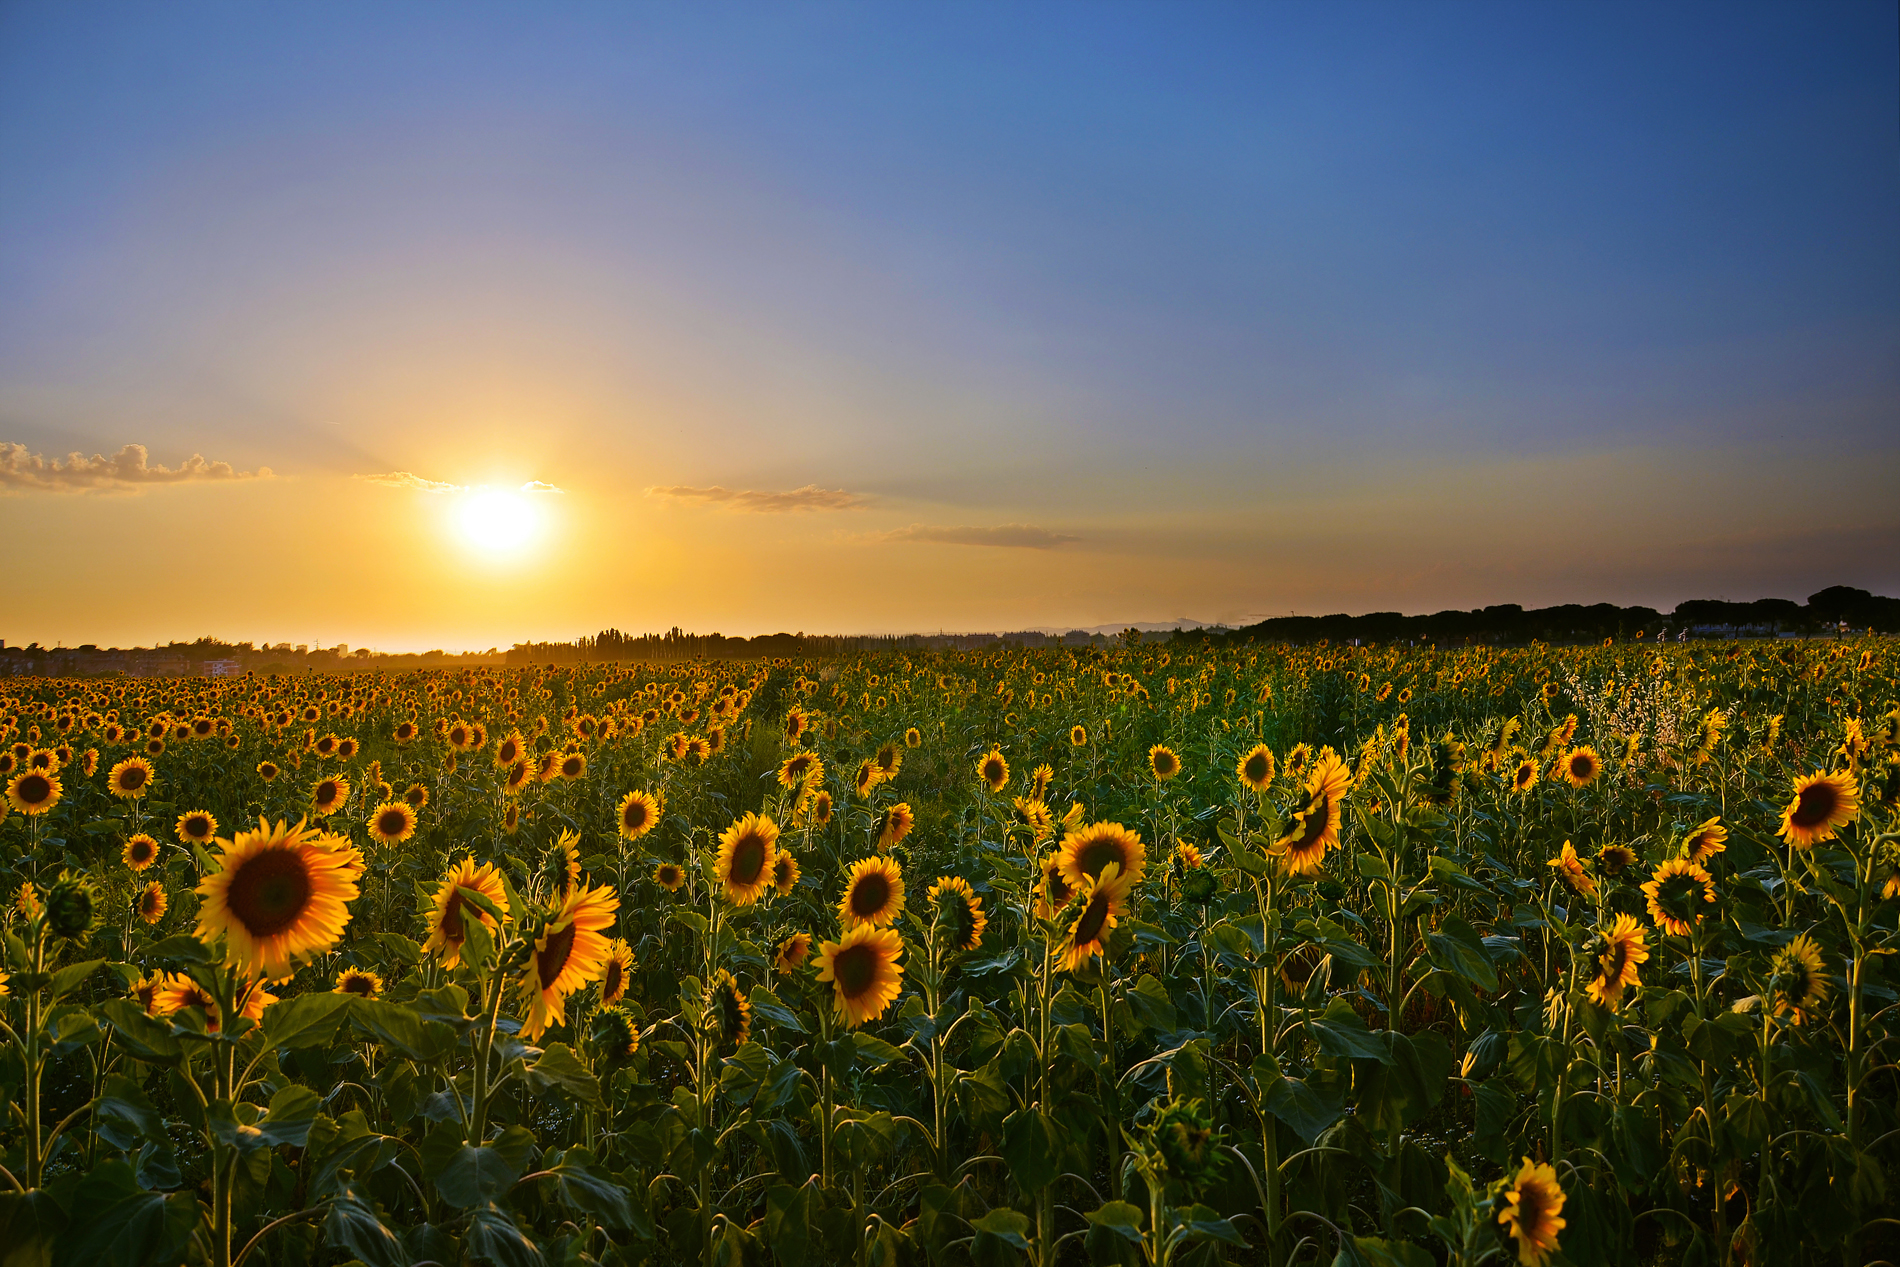 Sunflowers at the Sunset...